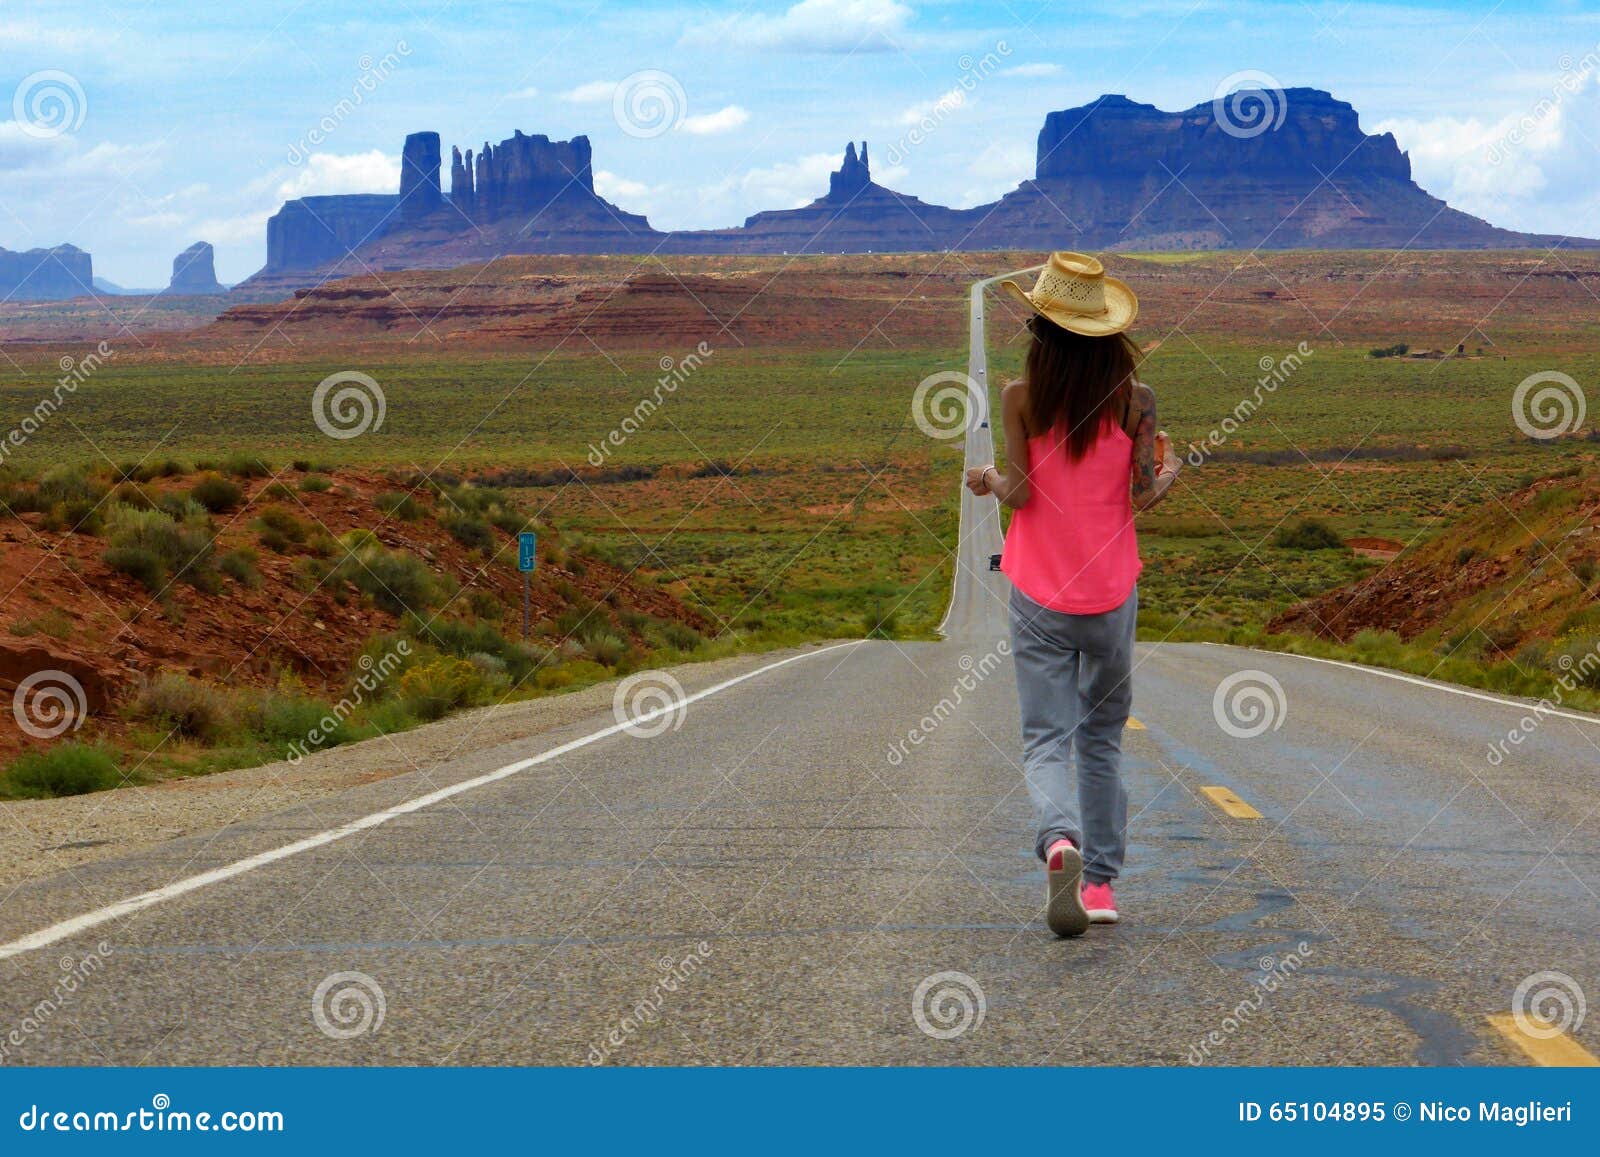 tourist walks in the monument valley